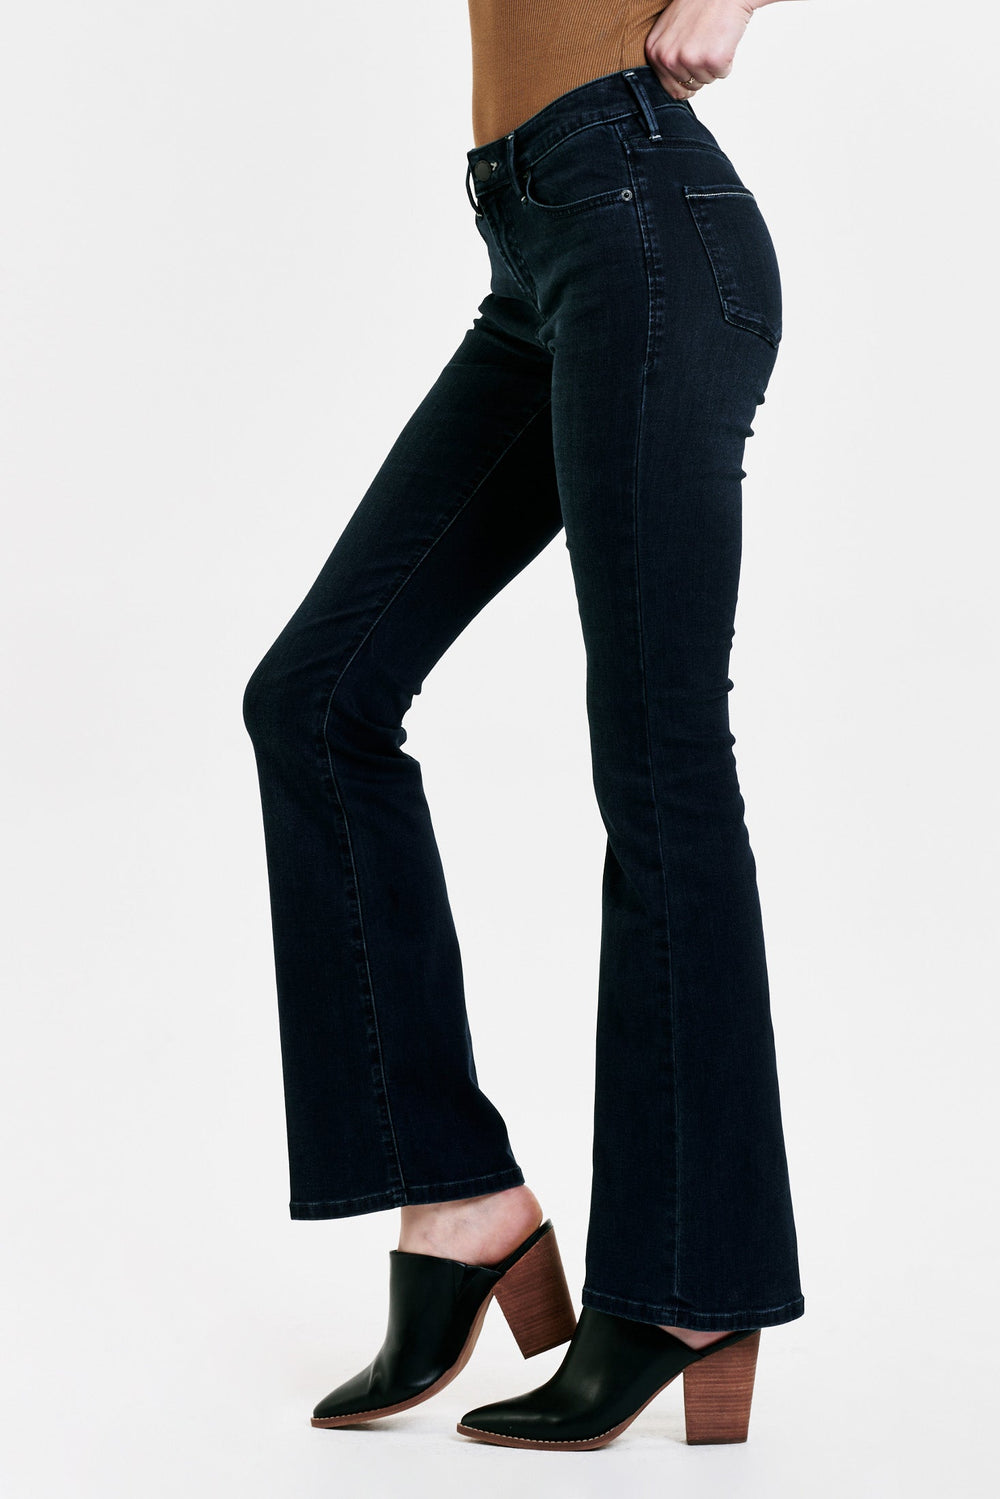 image of a female model wearing a JAXTYN HIGH RISE BOOTCUT JEANS ROSELLE JEANS